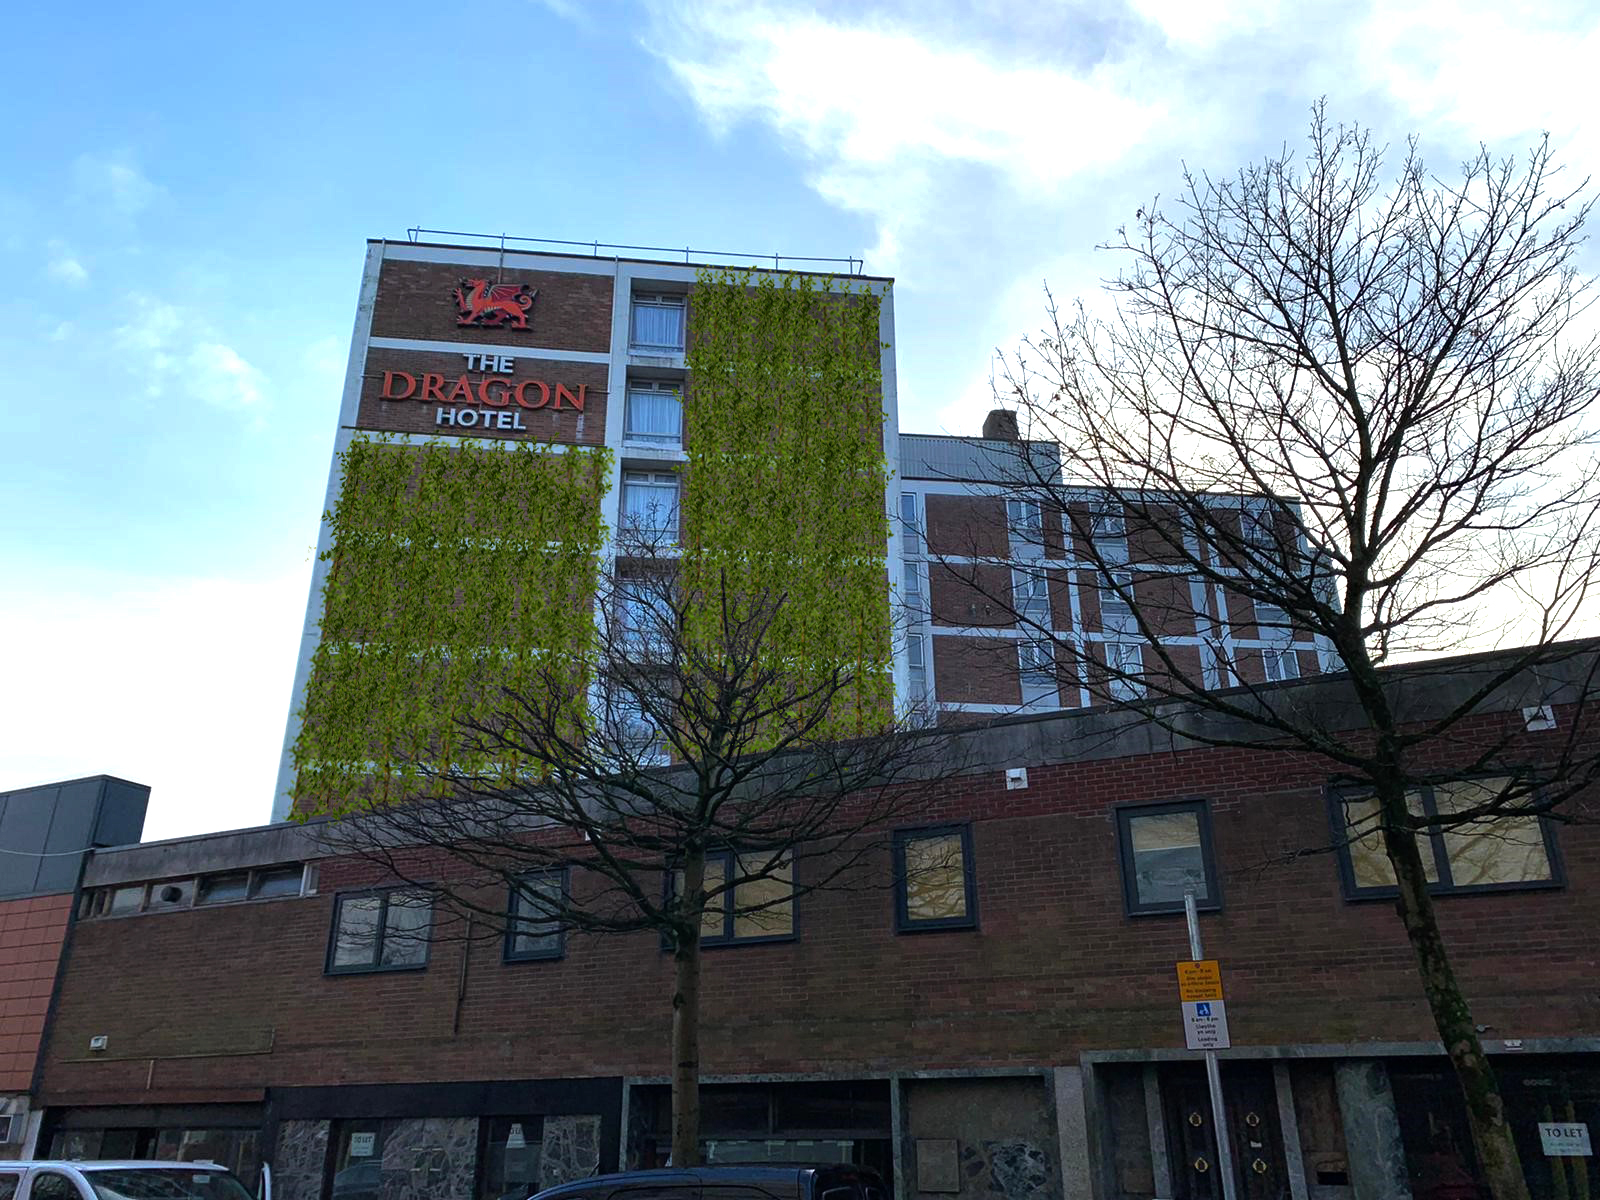 Dragon Hotel with CGI Green Wall – view from Bellevue Way